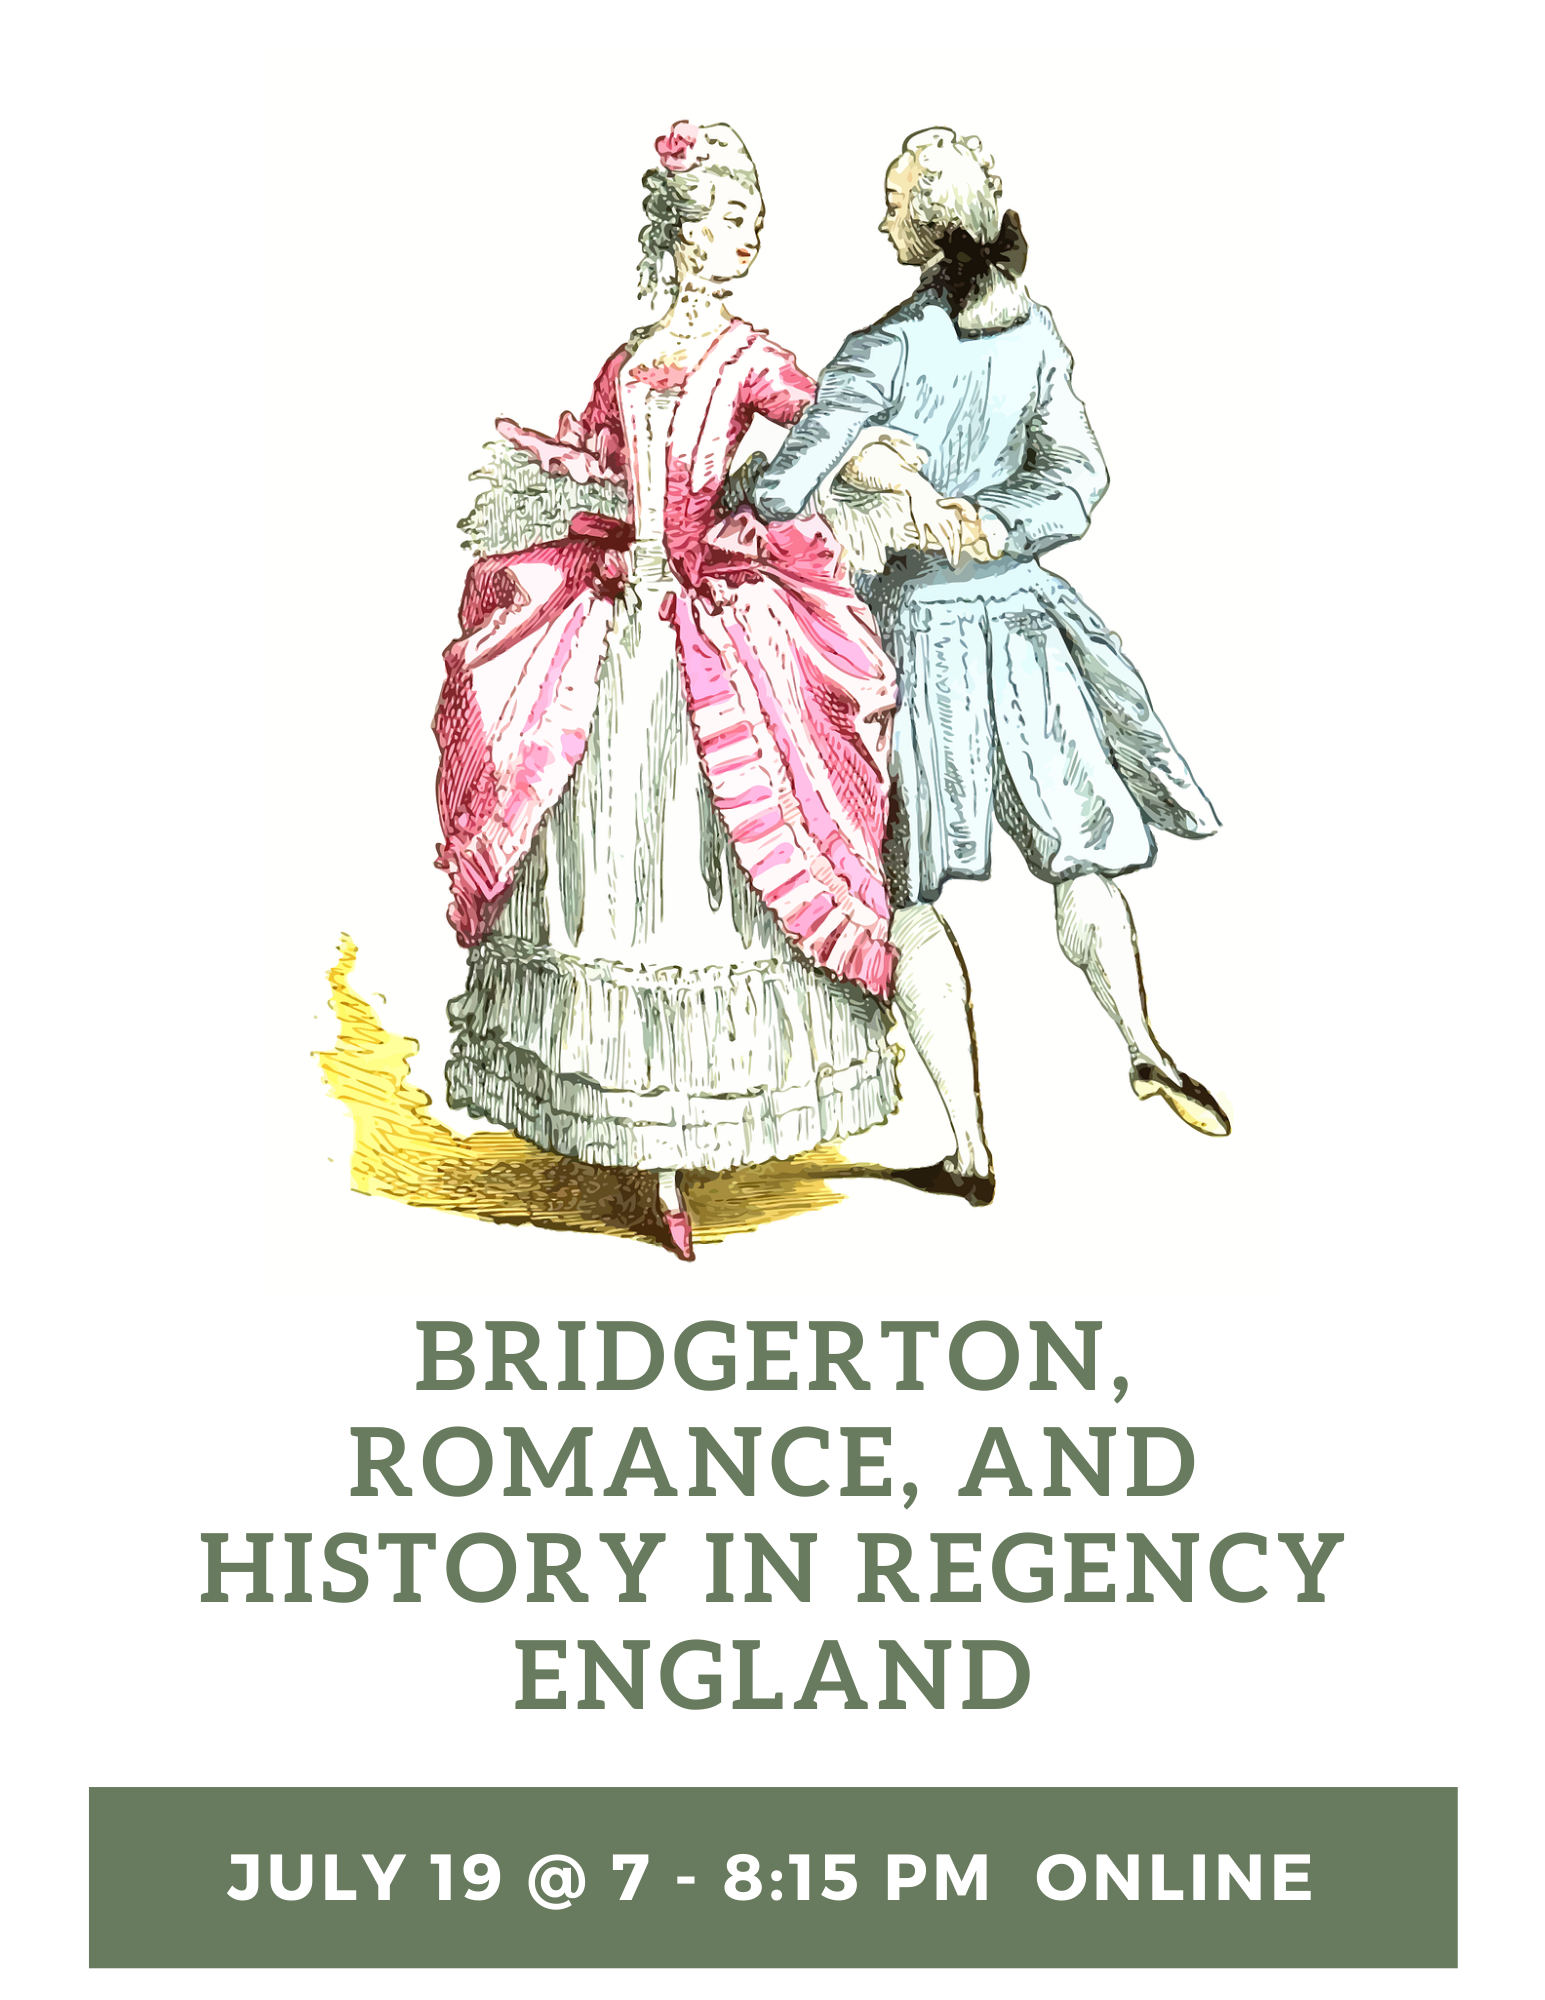 a colored pen and ink drawing of a couple waltzing in regency england